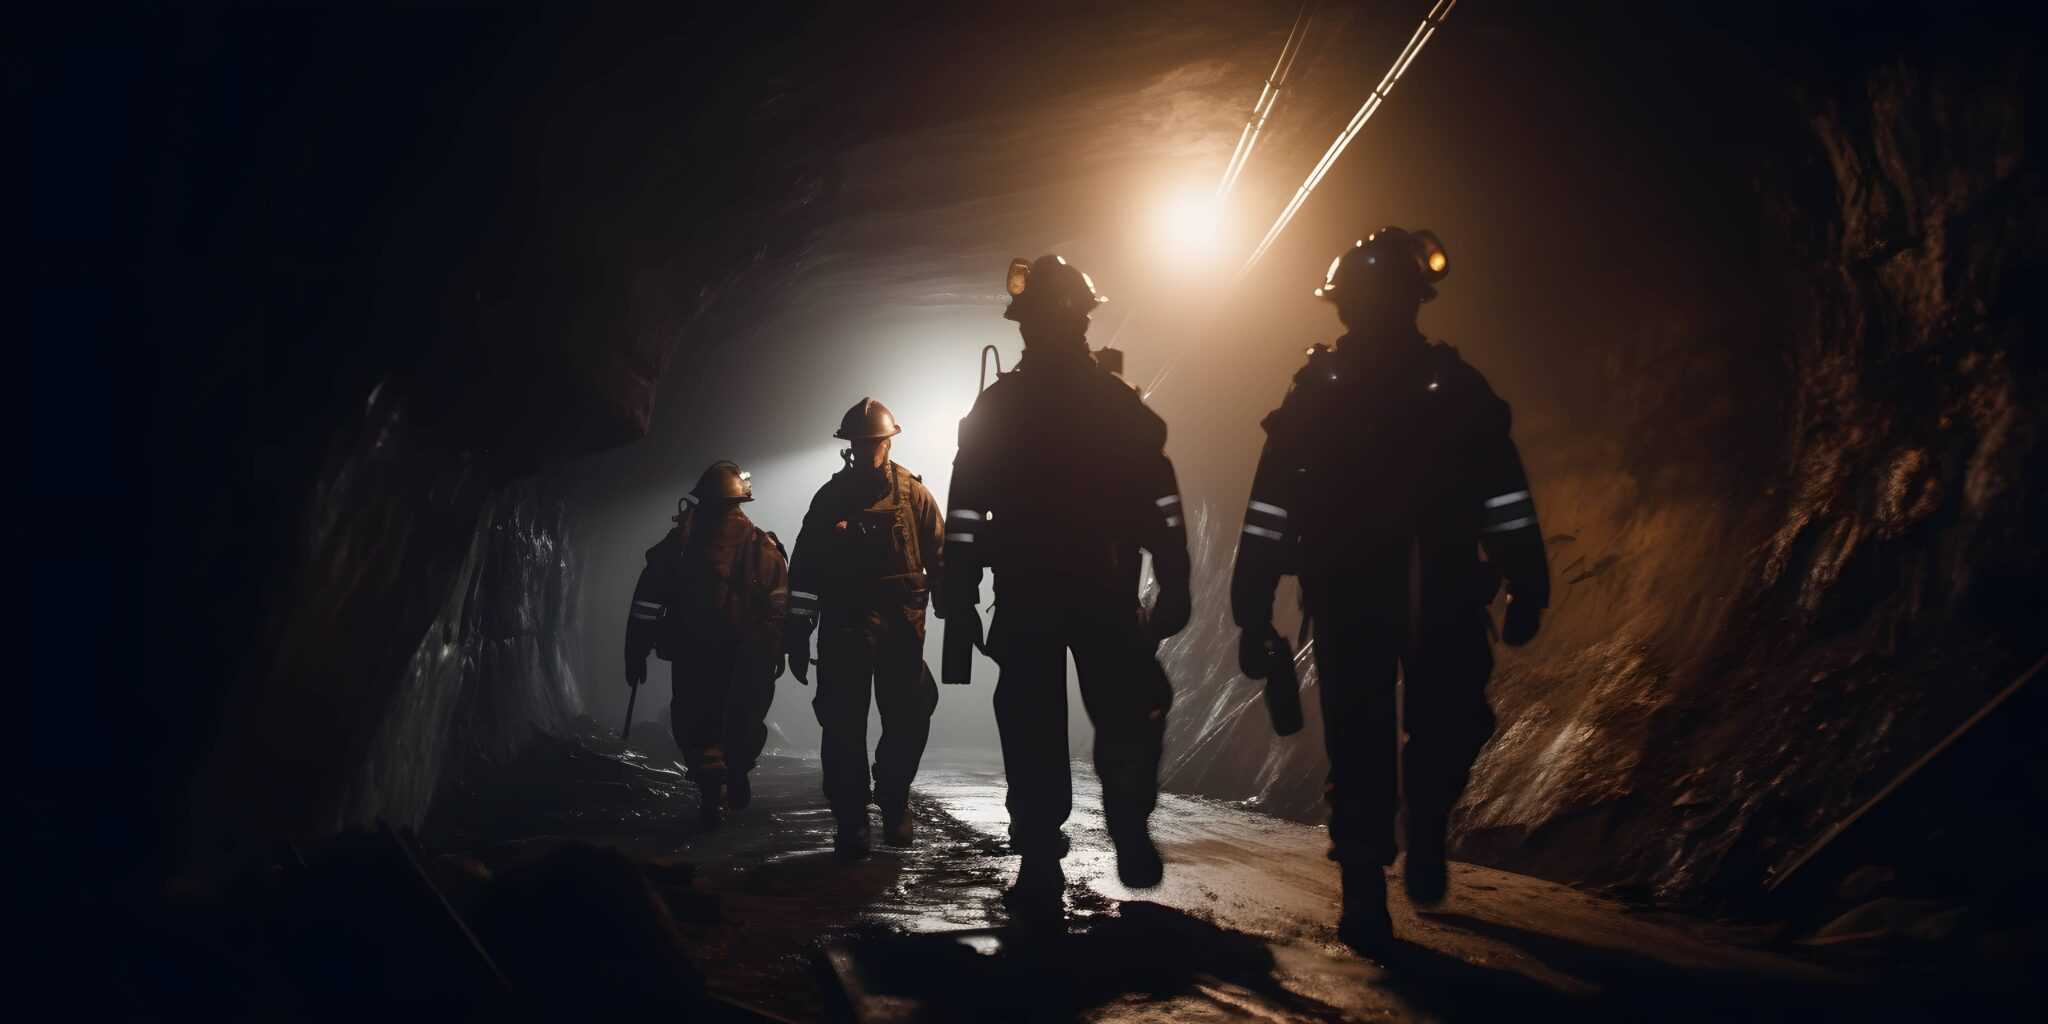 People working in a mine